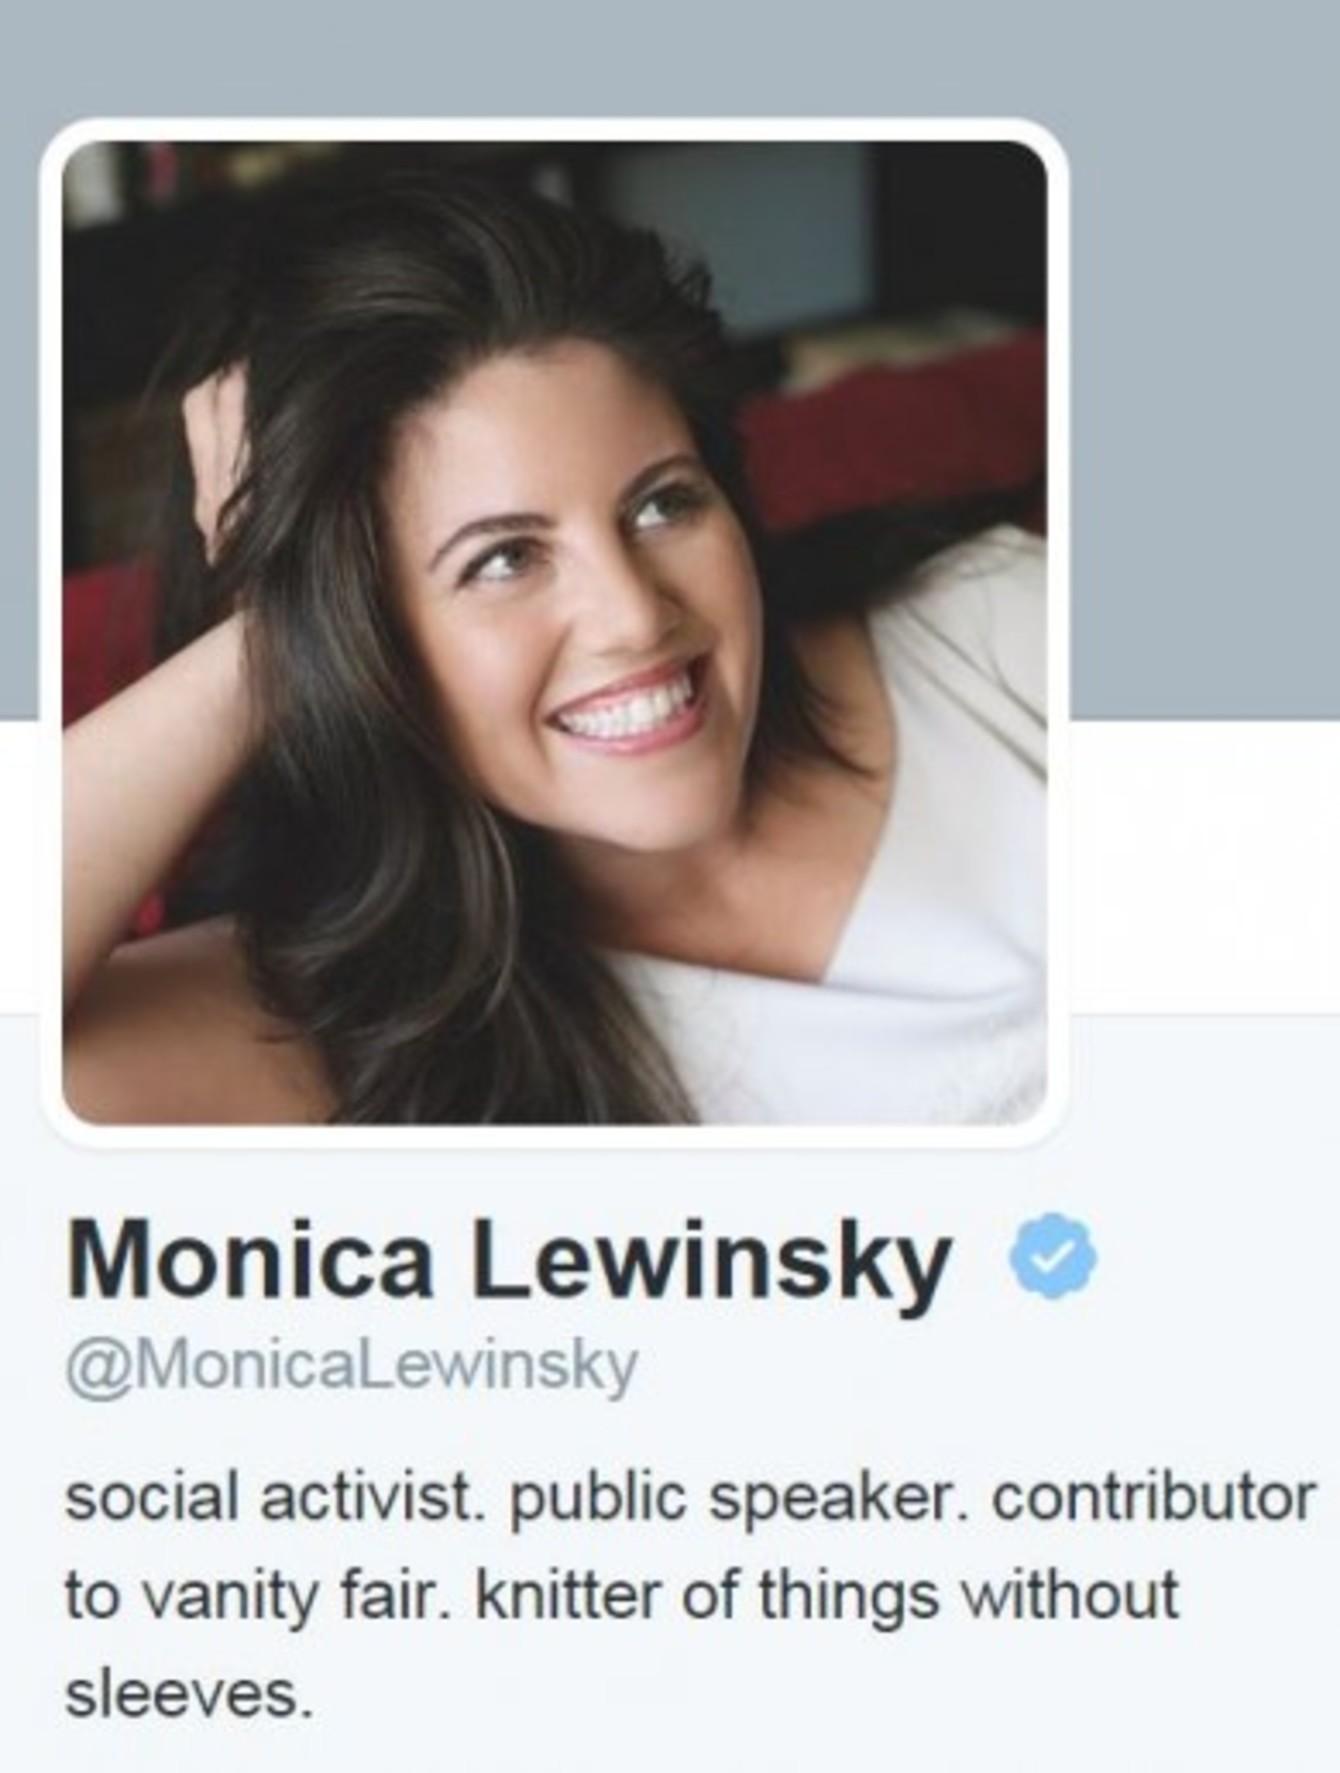 Monica Lewinsky joins Twitter and launches a mission to end cyberbullying1340 x 1773